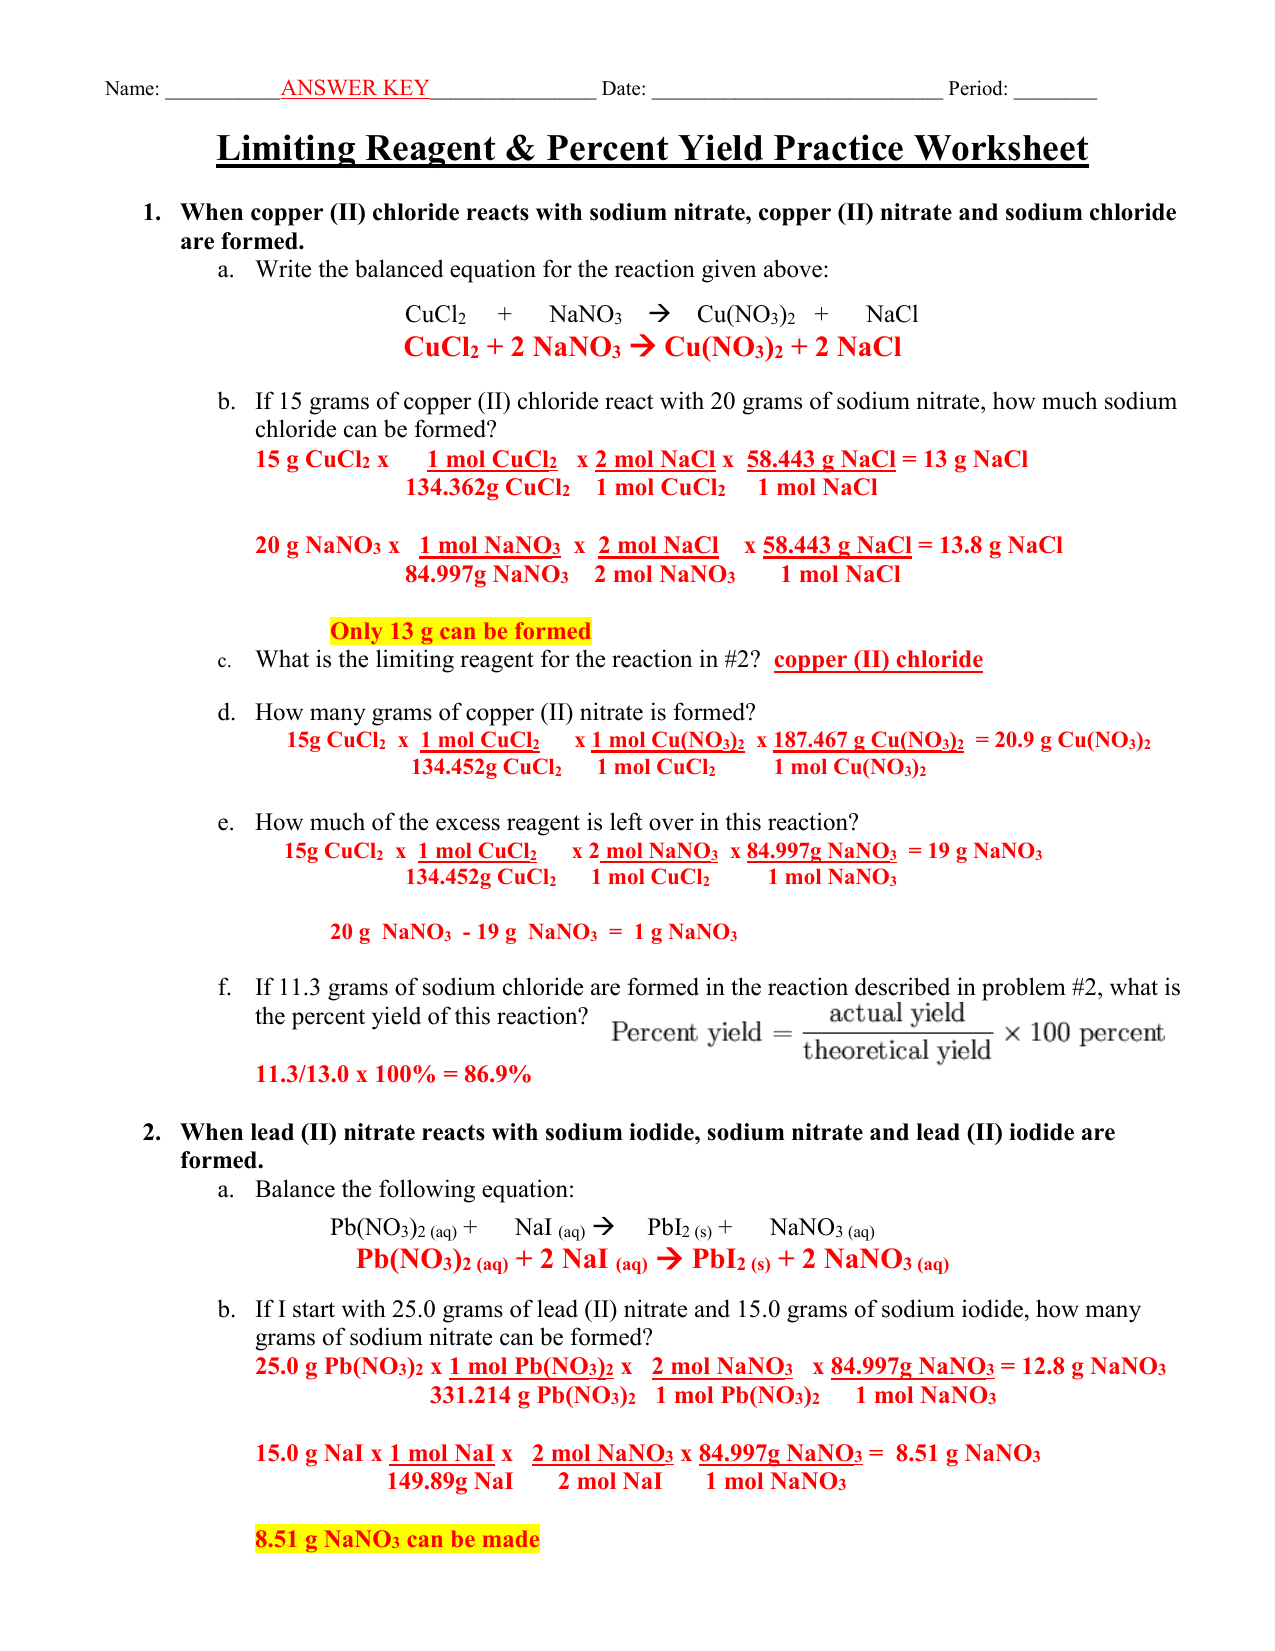  Limiting Reagent Worksheet 1 Answers Free Download Gambr co